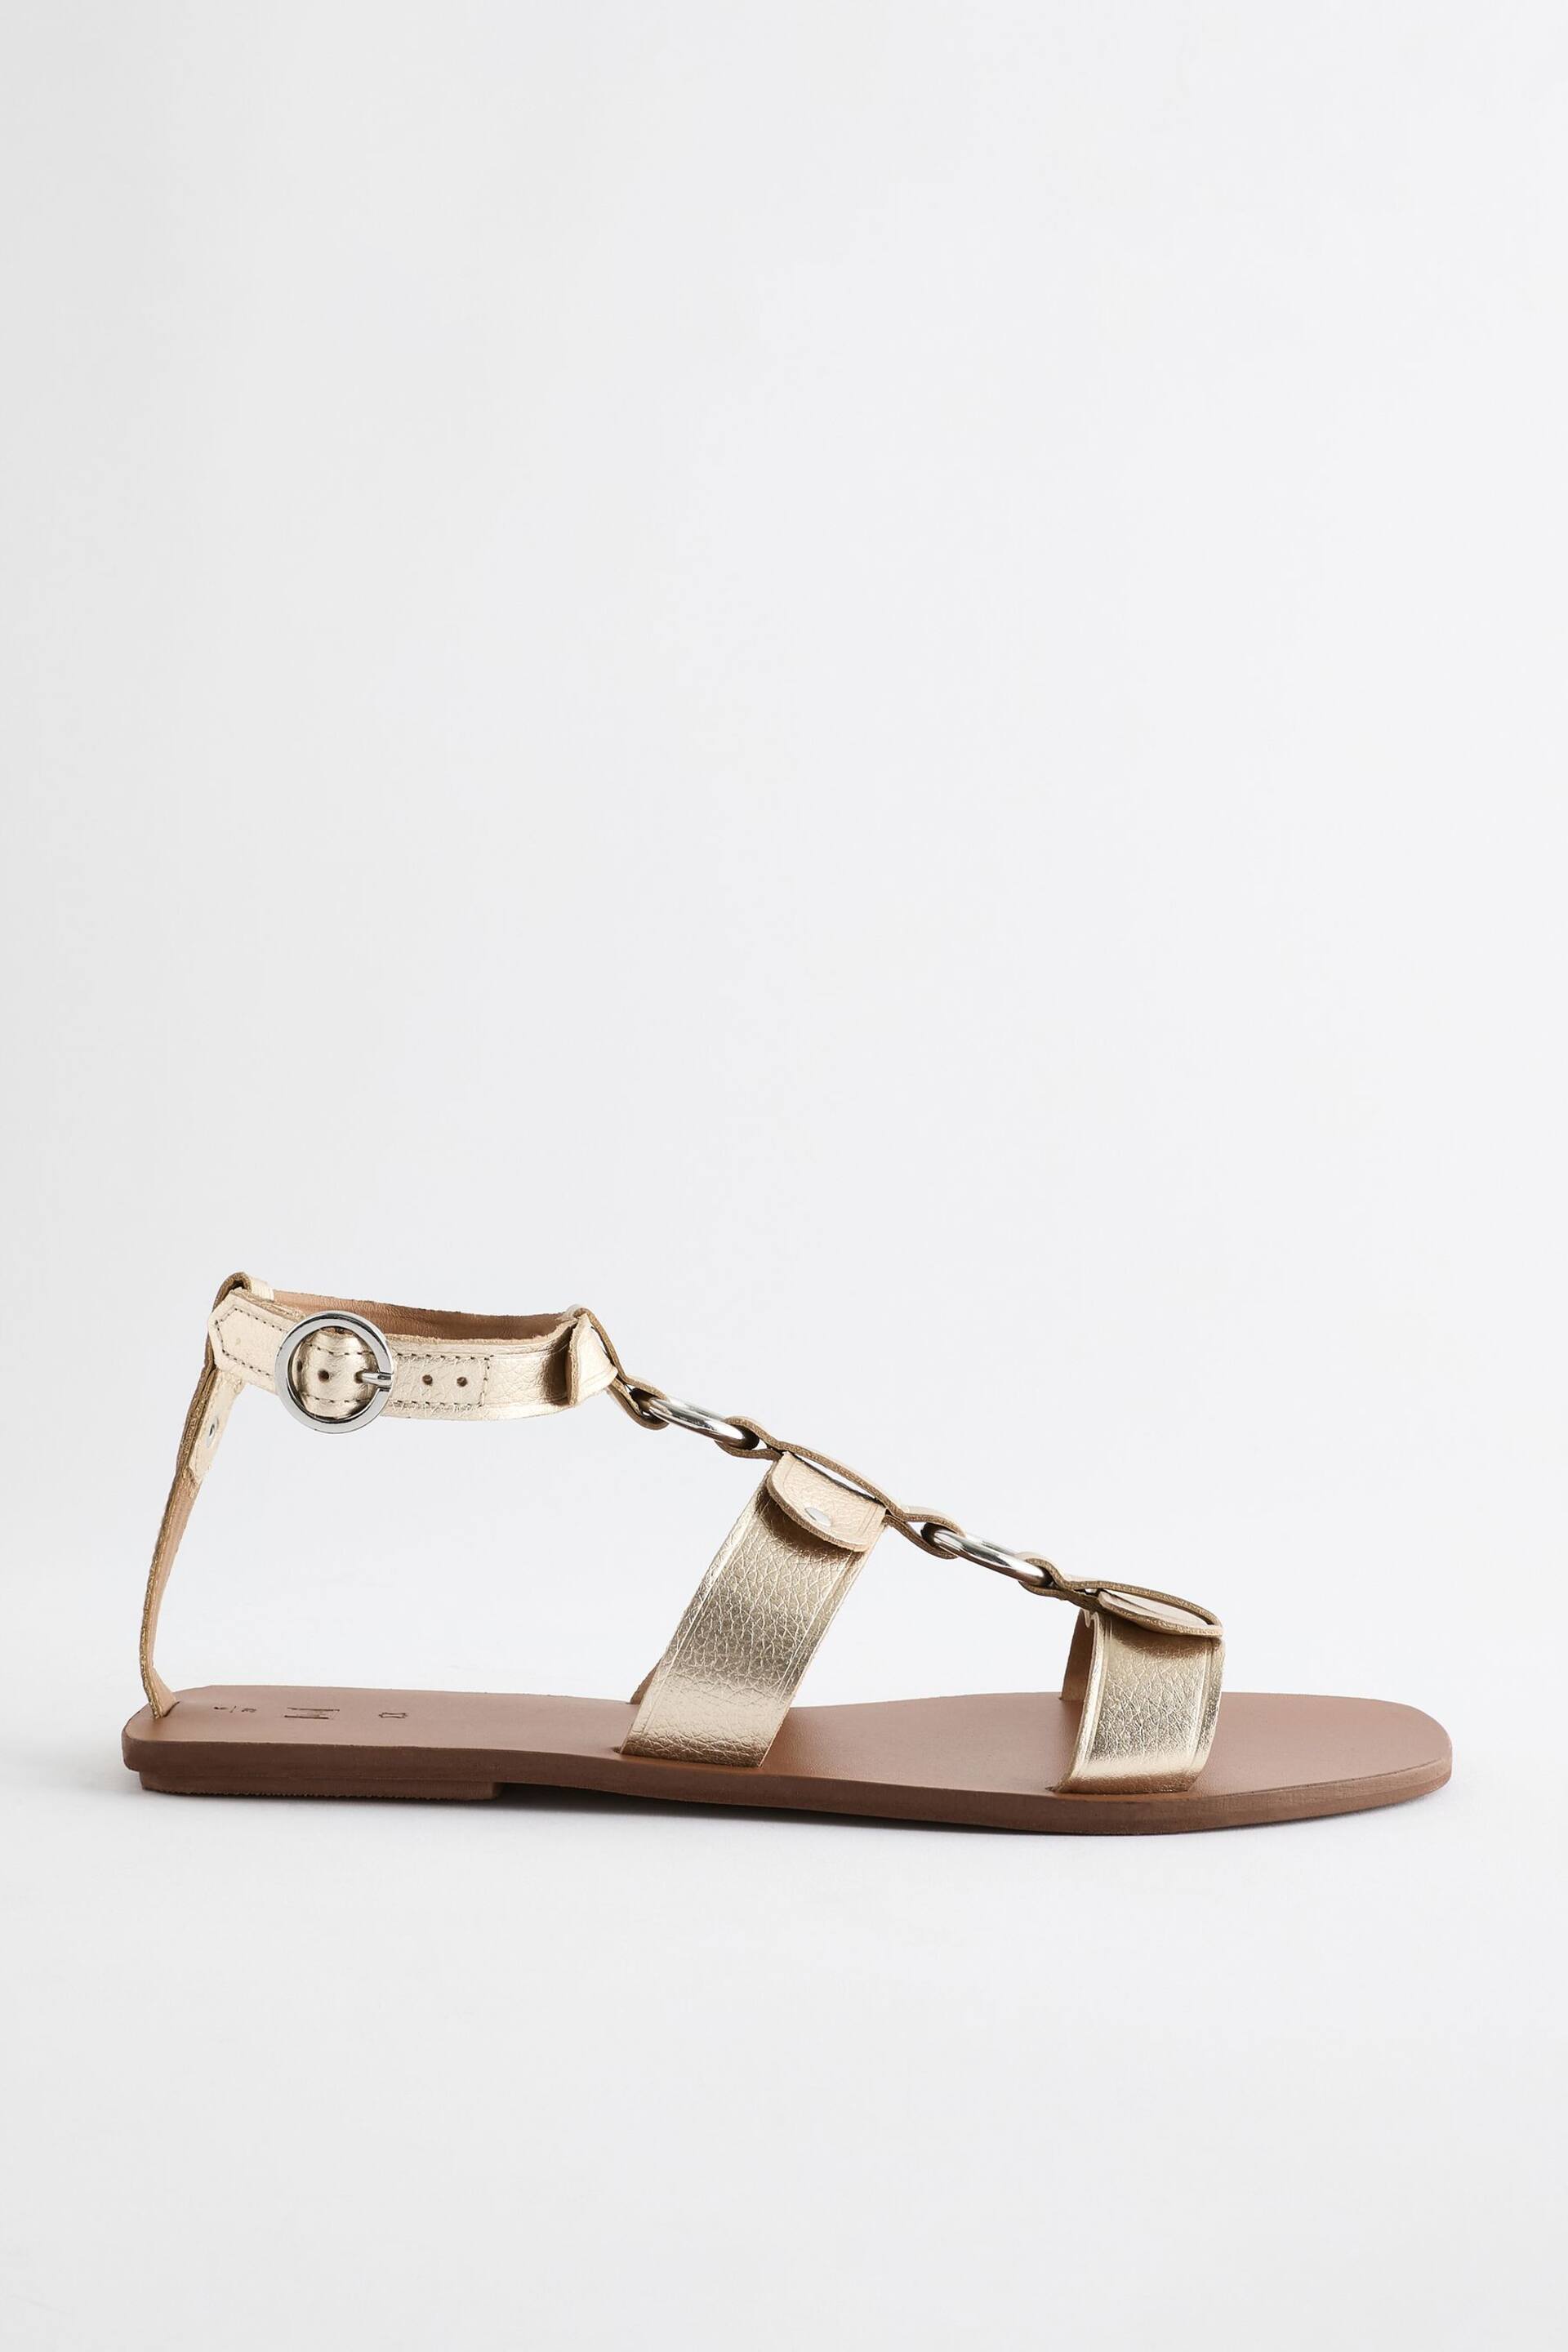 Gold Leather Ring Detail Sandals - Image 5 of 5